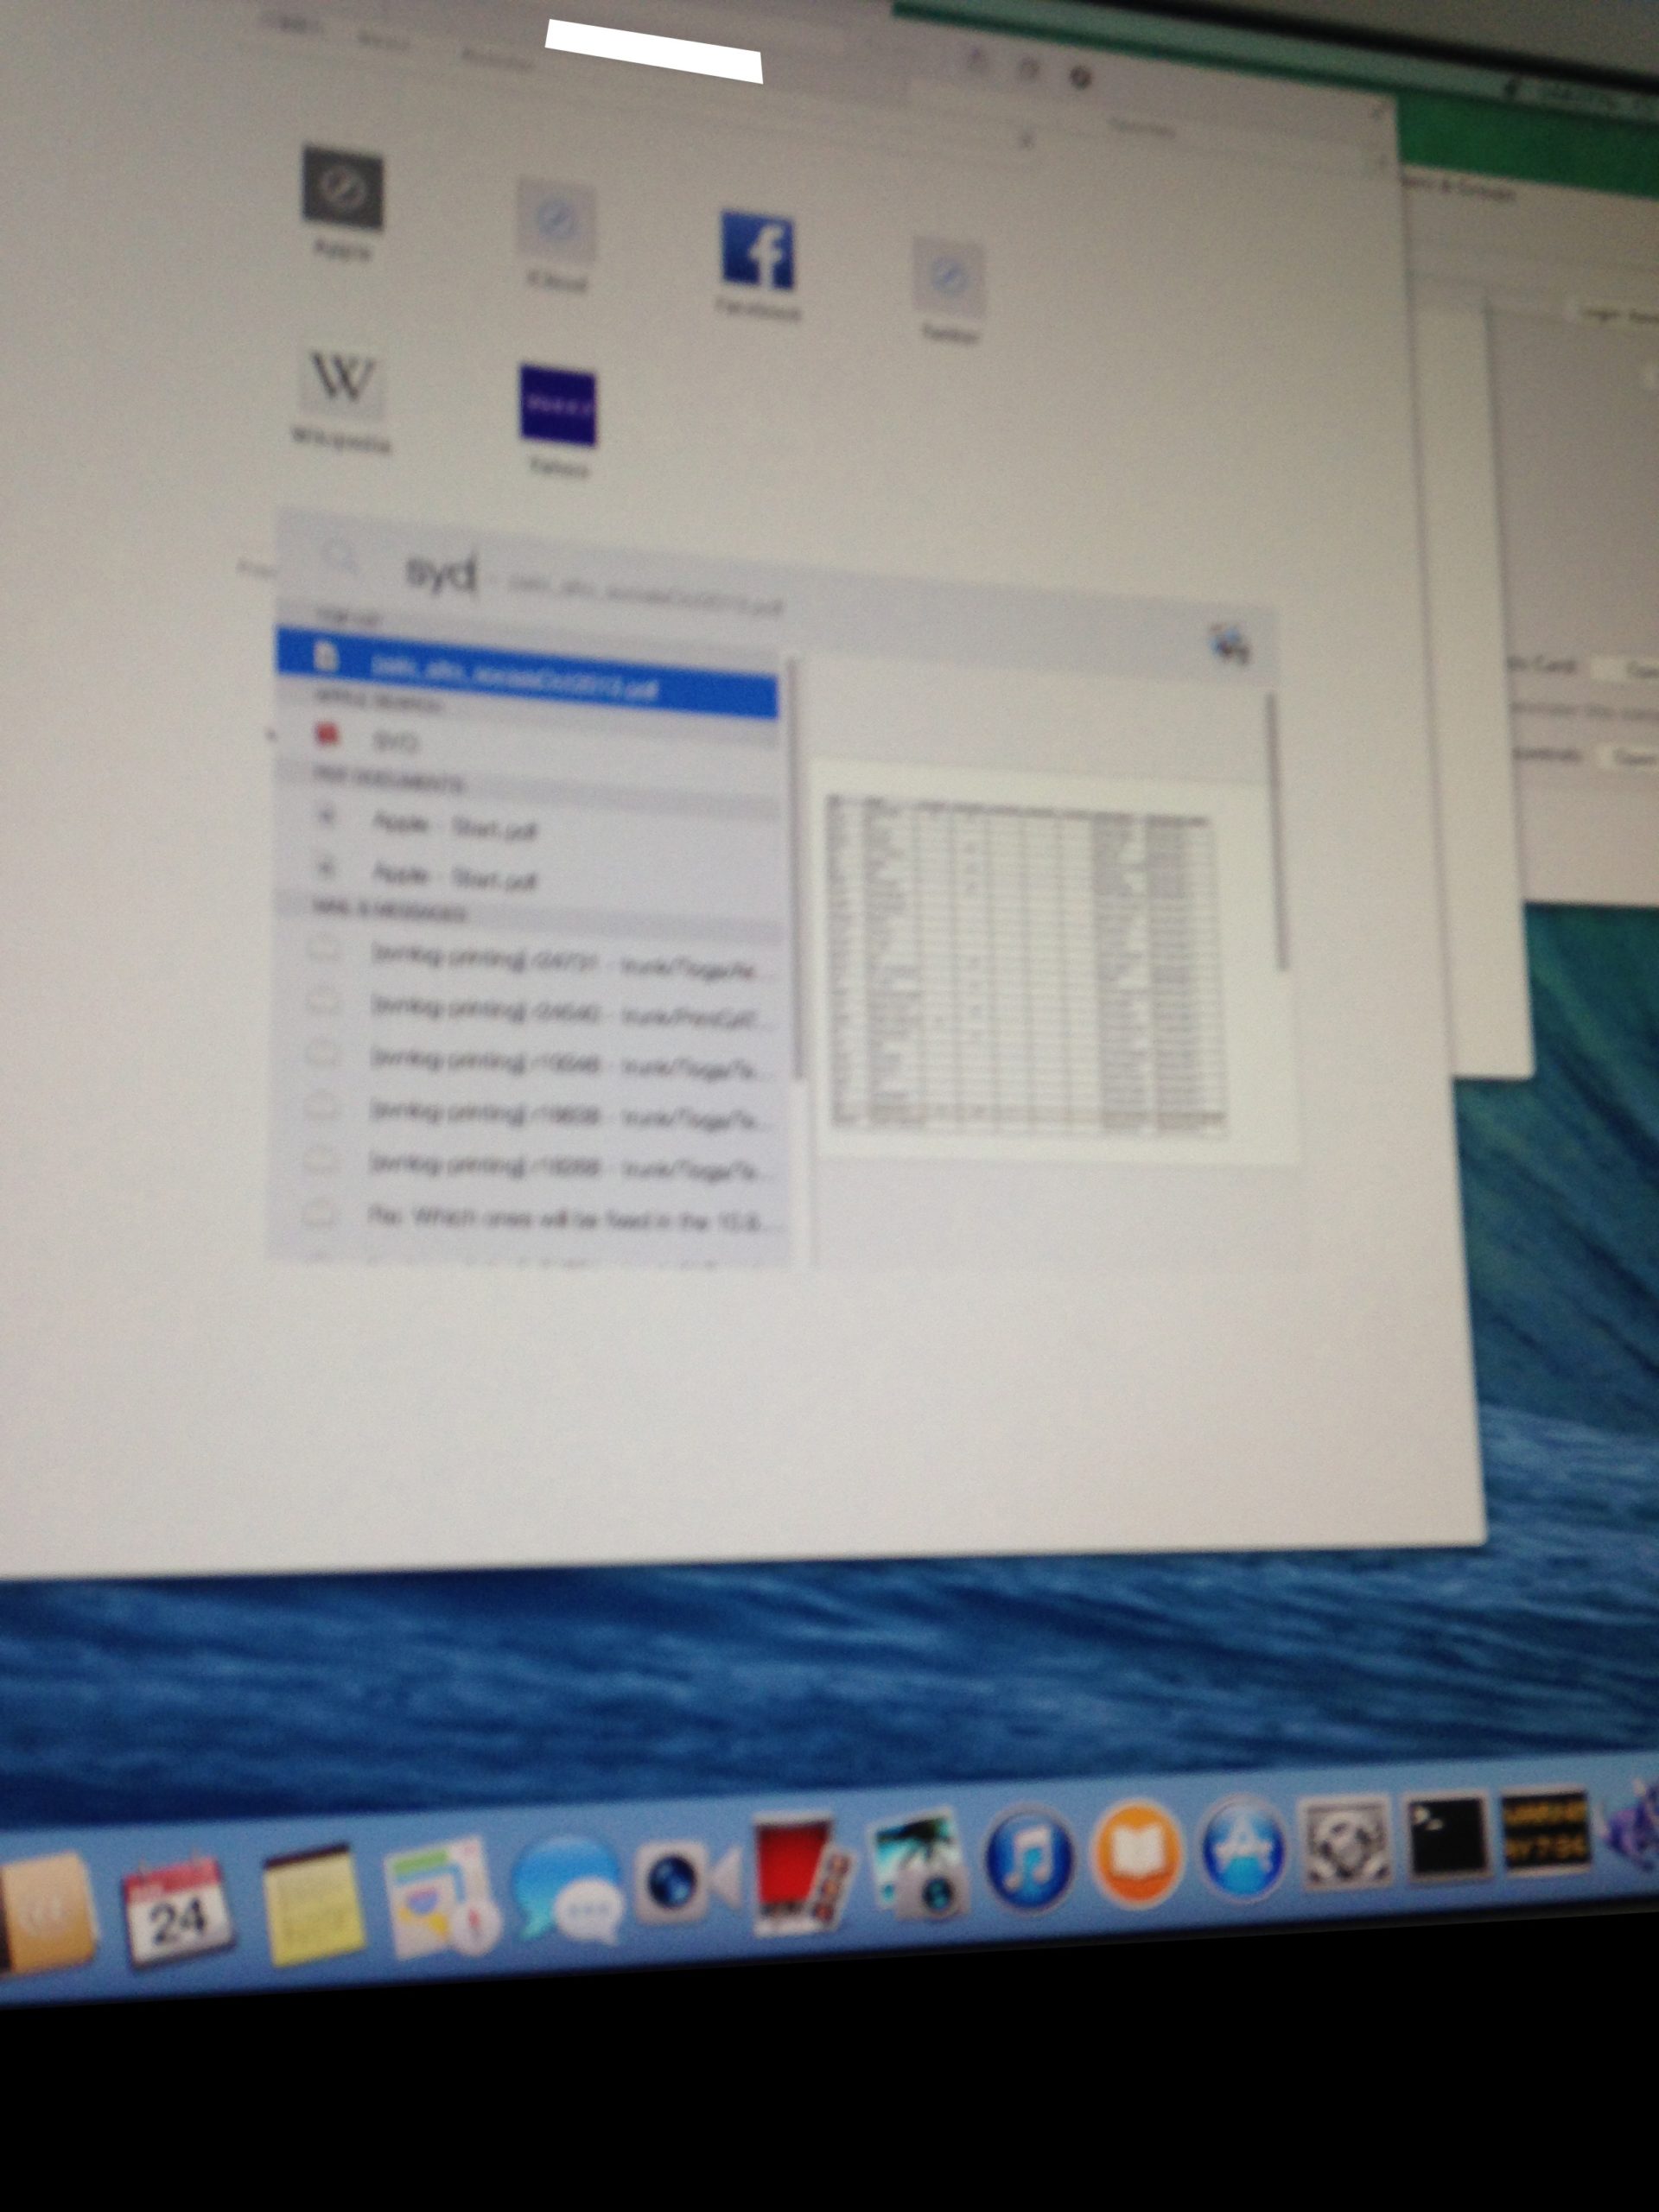 Leaked OS X Images Could Reveal The iOS-Like Future Of The Mac